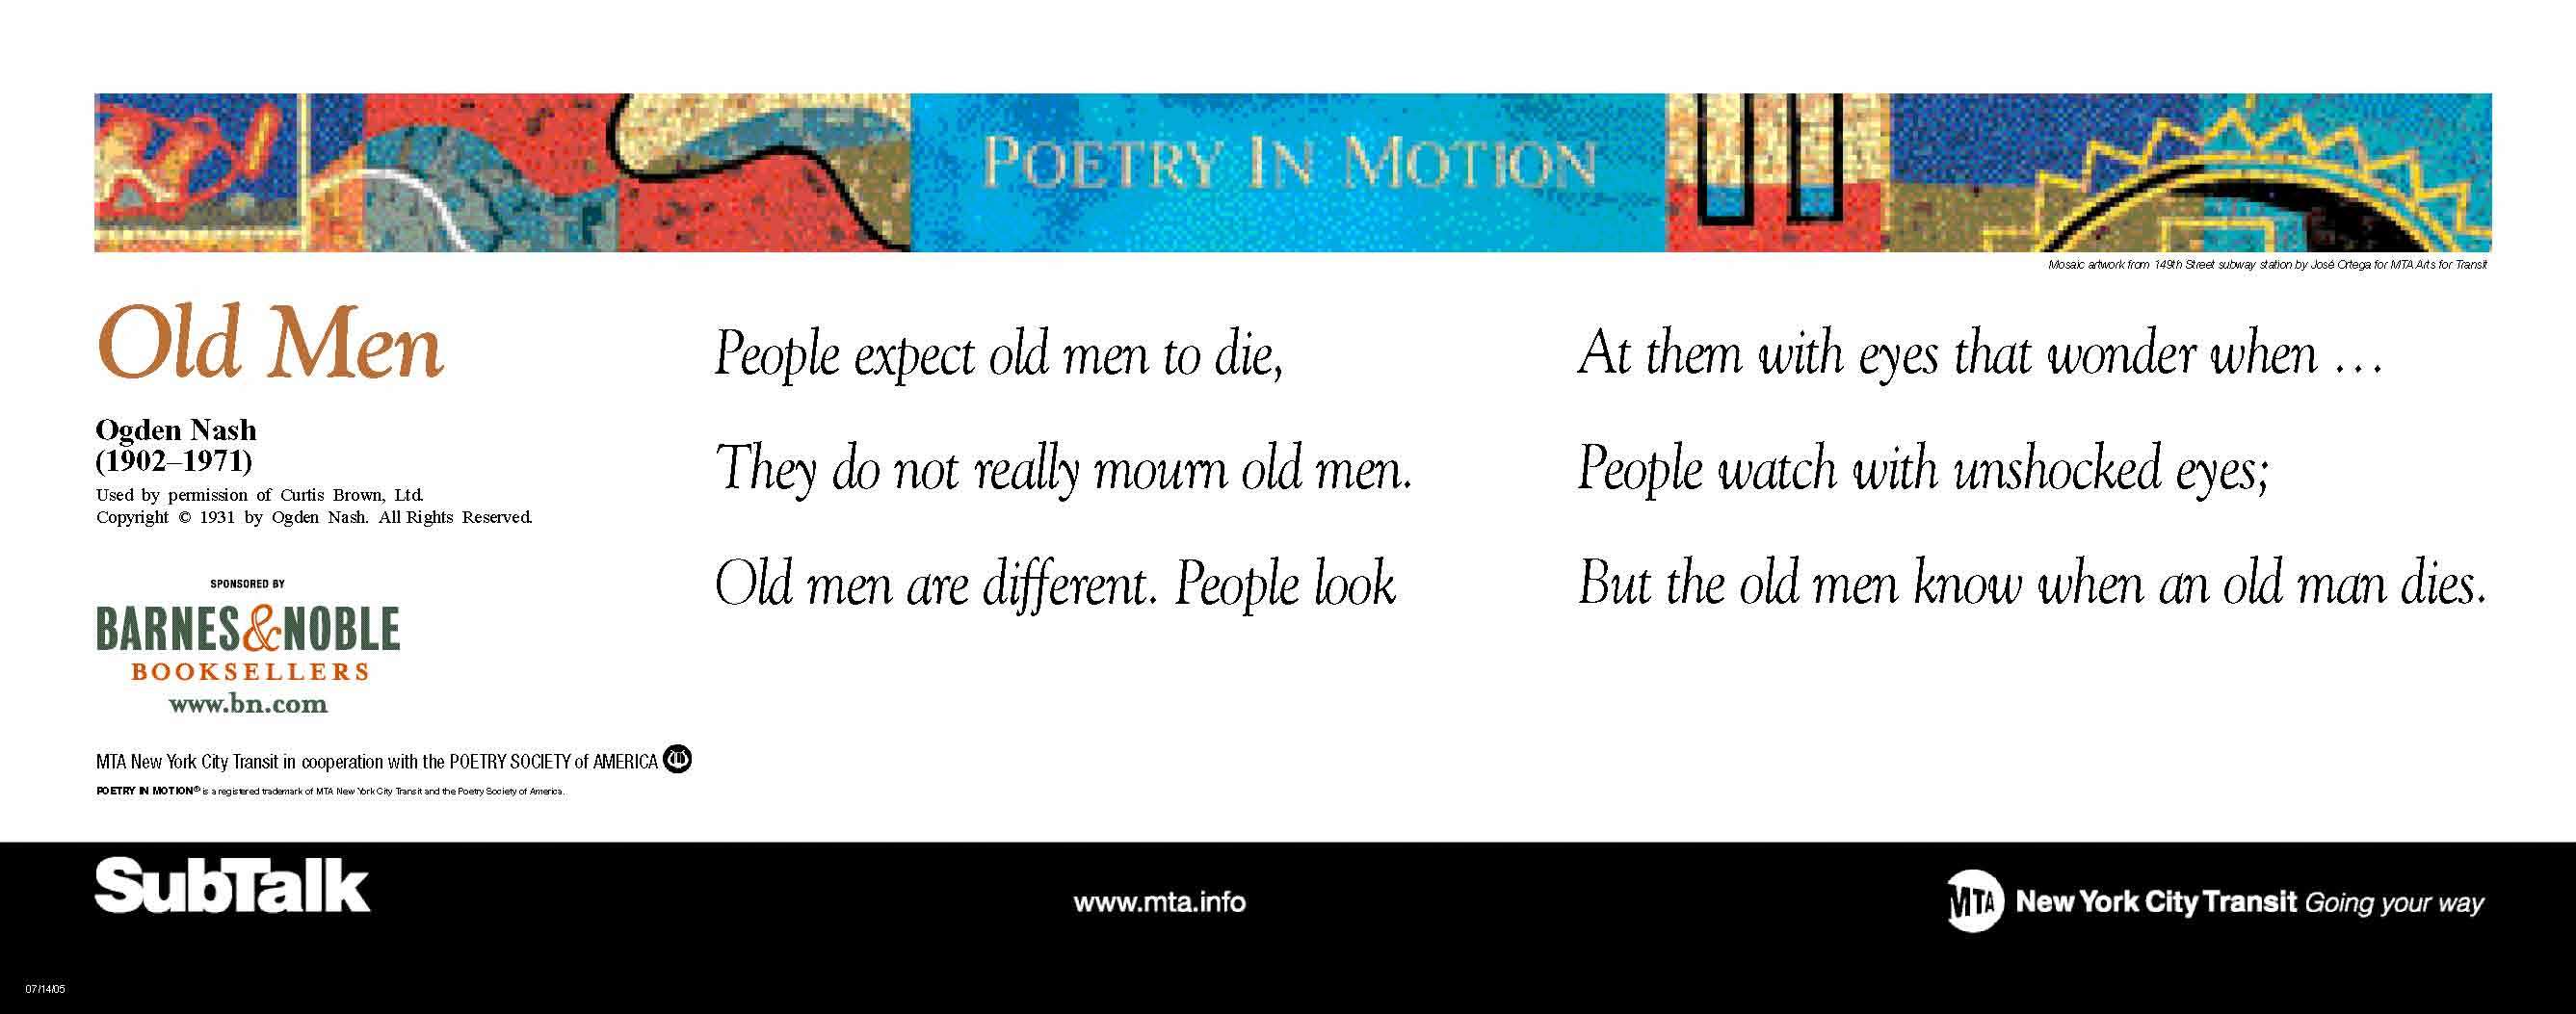 A horizontal poster with a colorful mosaic at the top features a poem titled Old Men, by Ogden Nash.